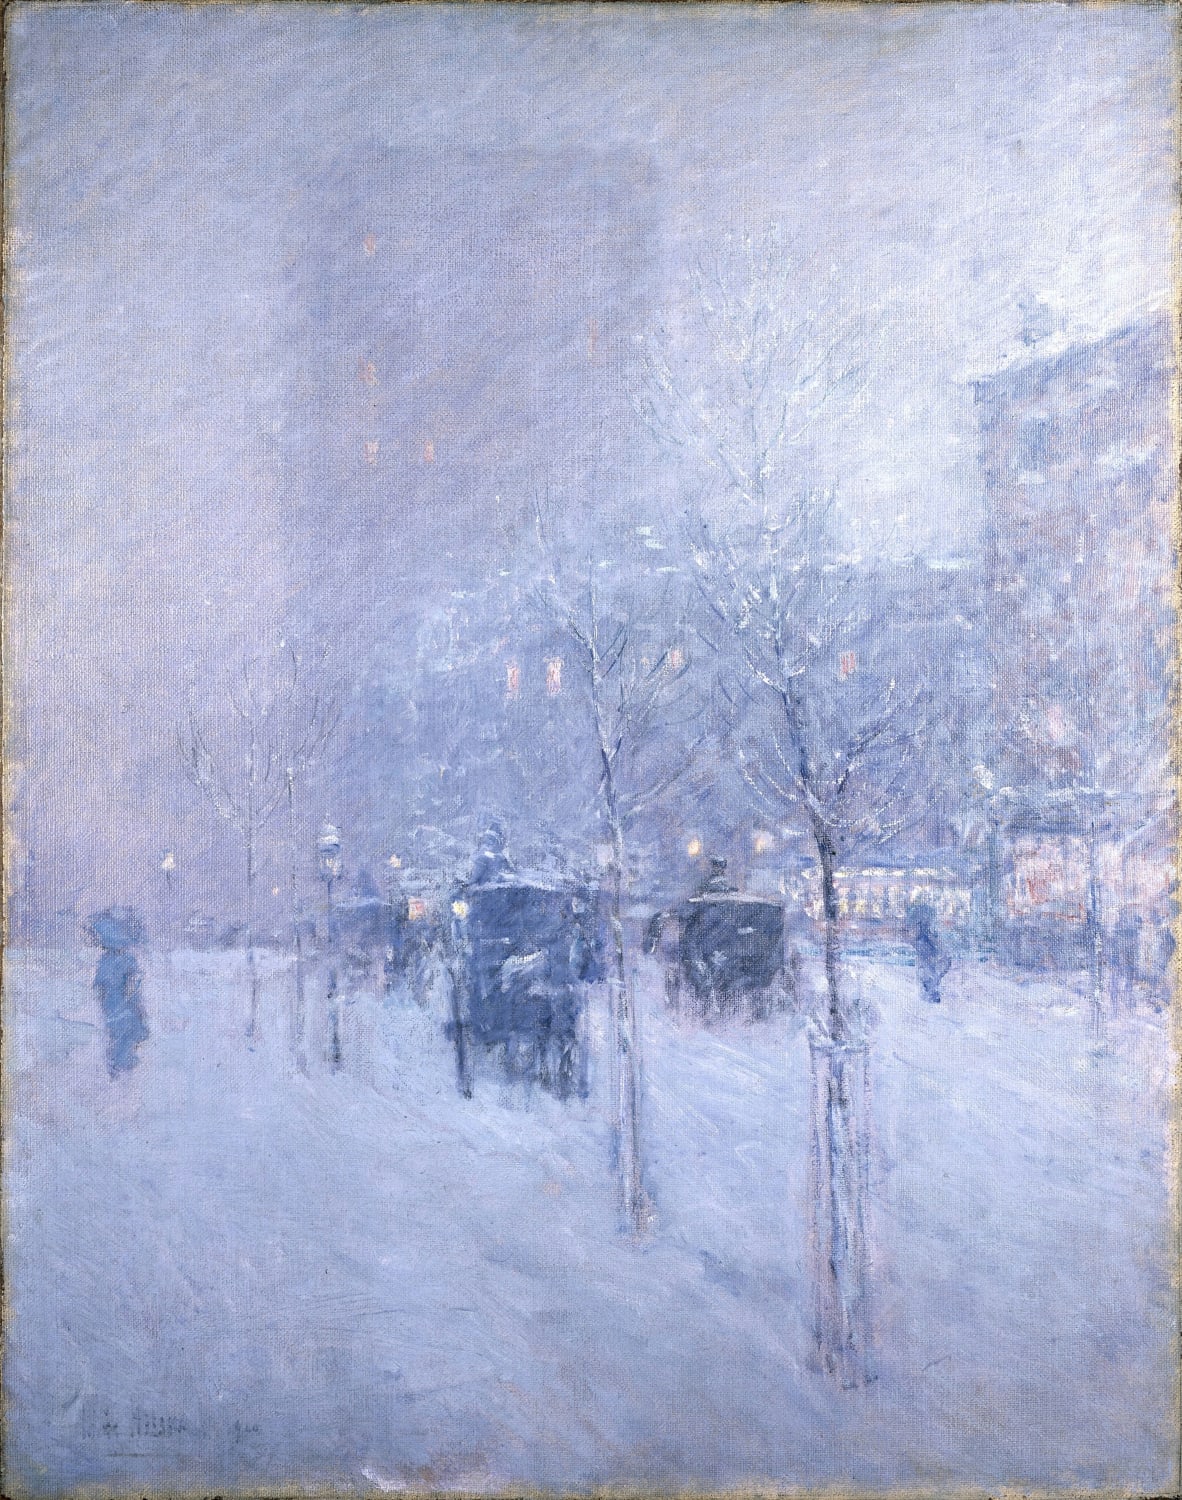 Late Afternoon, New York, Winter, Childe Hassam, 1900,